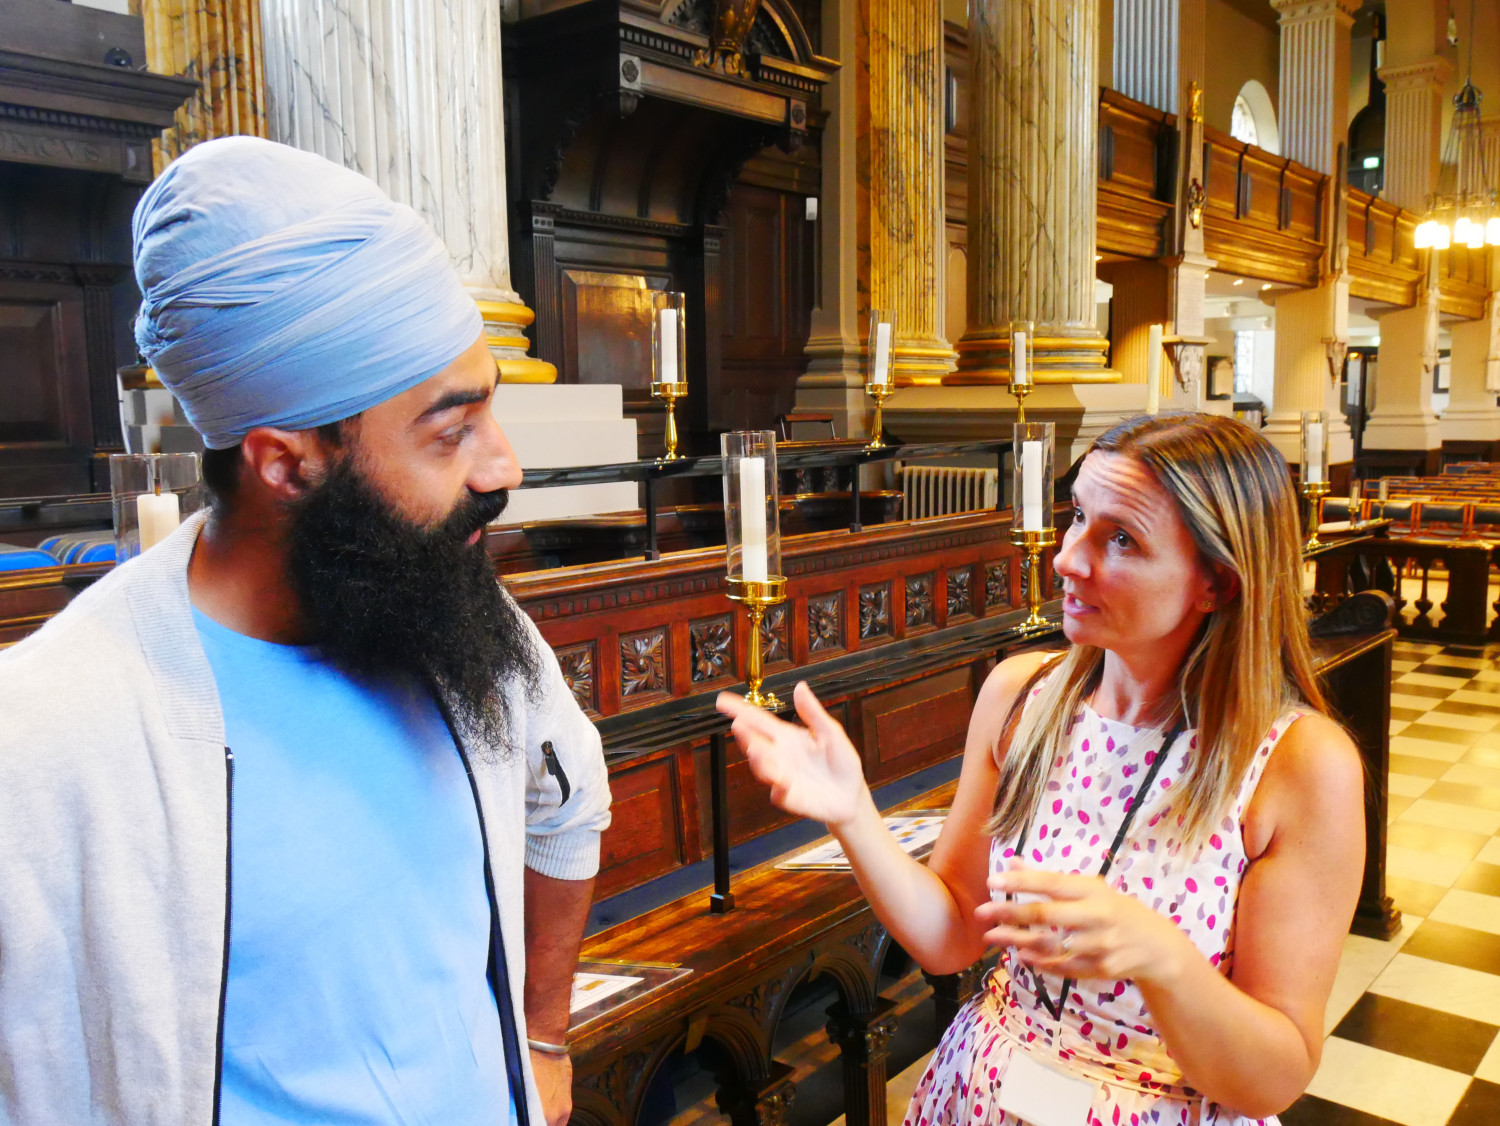 A Sikh man and a Christian woman talking together